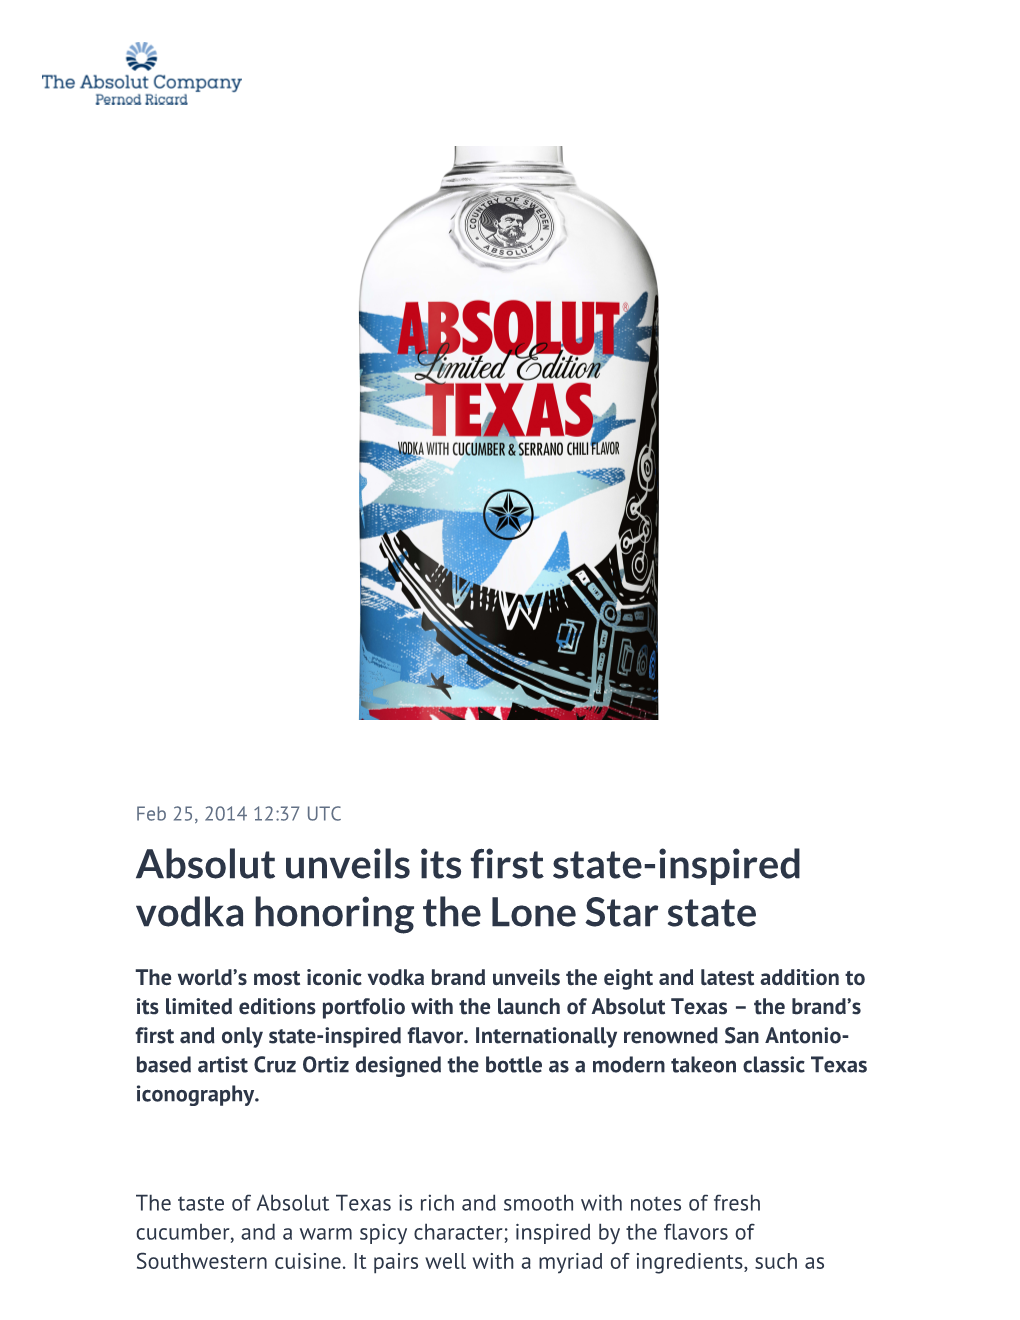 Absolut Unveils Its First State-Inspired Vodka Honoring the Lone Star State